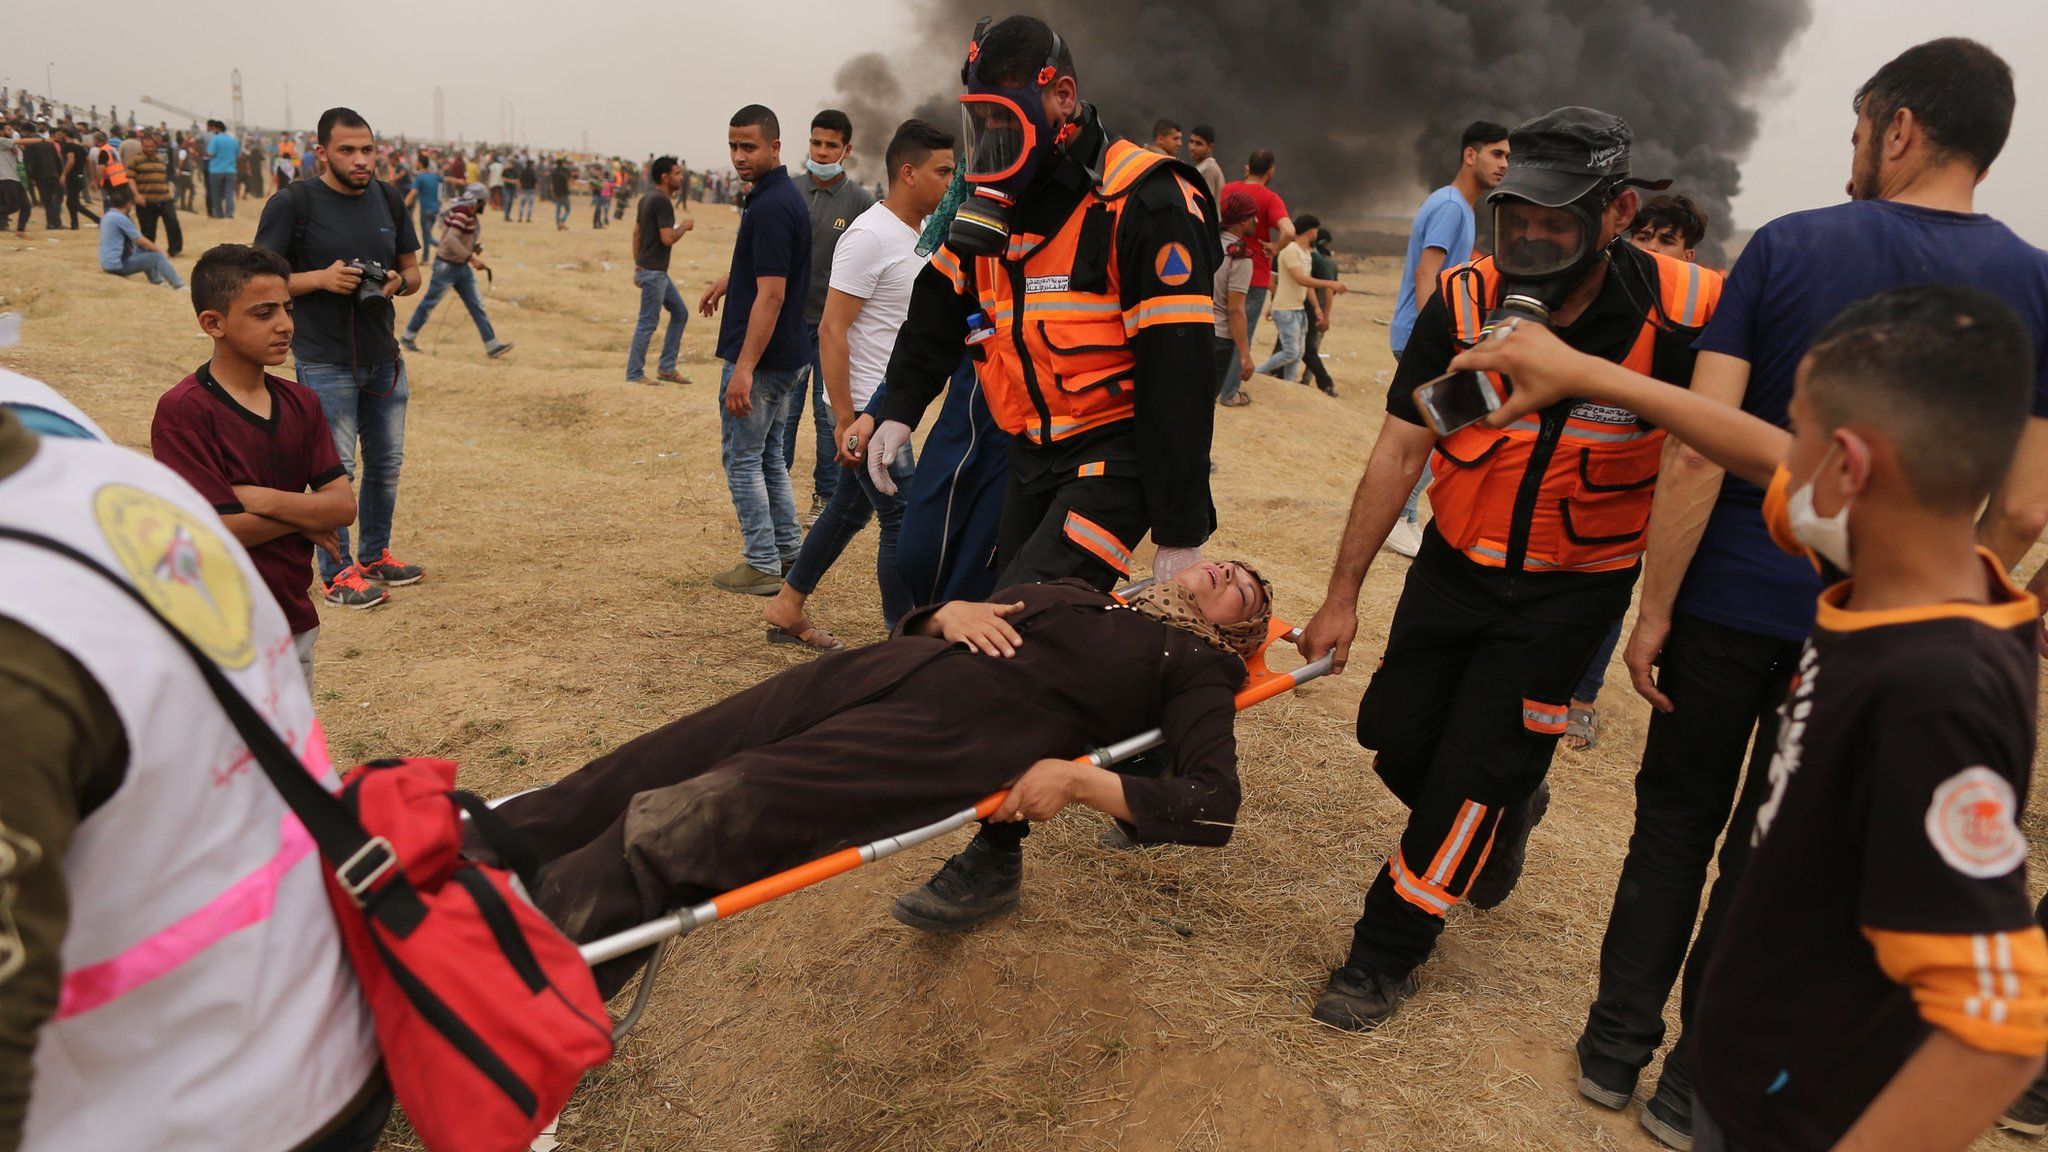 Palestinian medics carry an injured Palestinian woman during a protest near the Gaza-Israel border fence on 4 May 2018